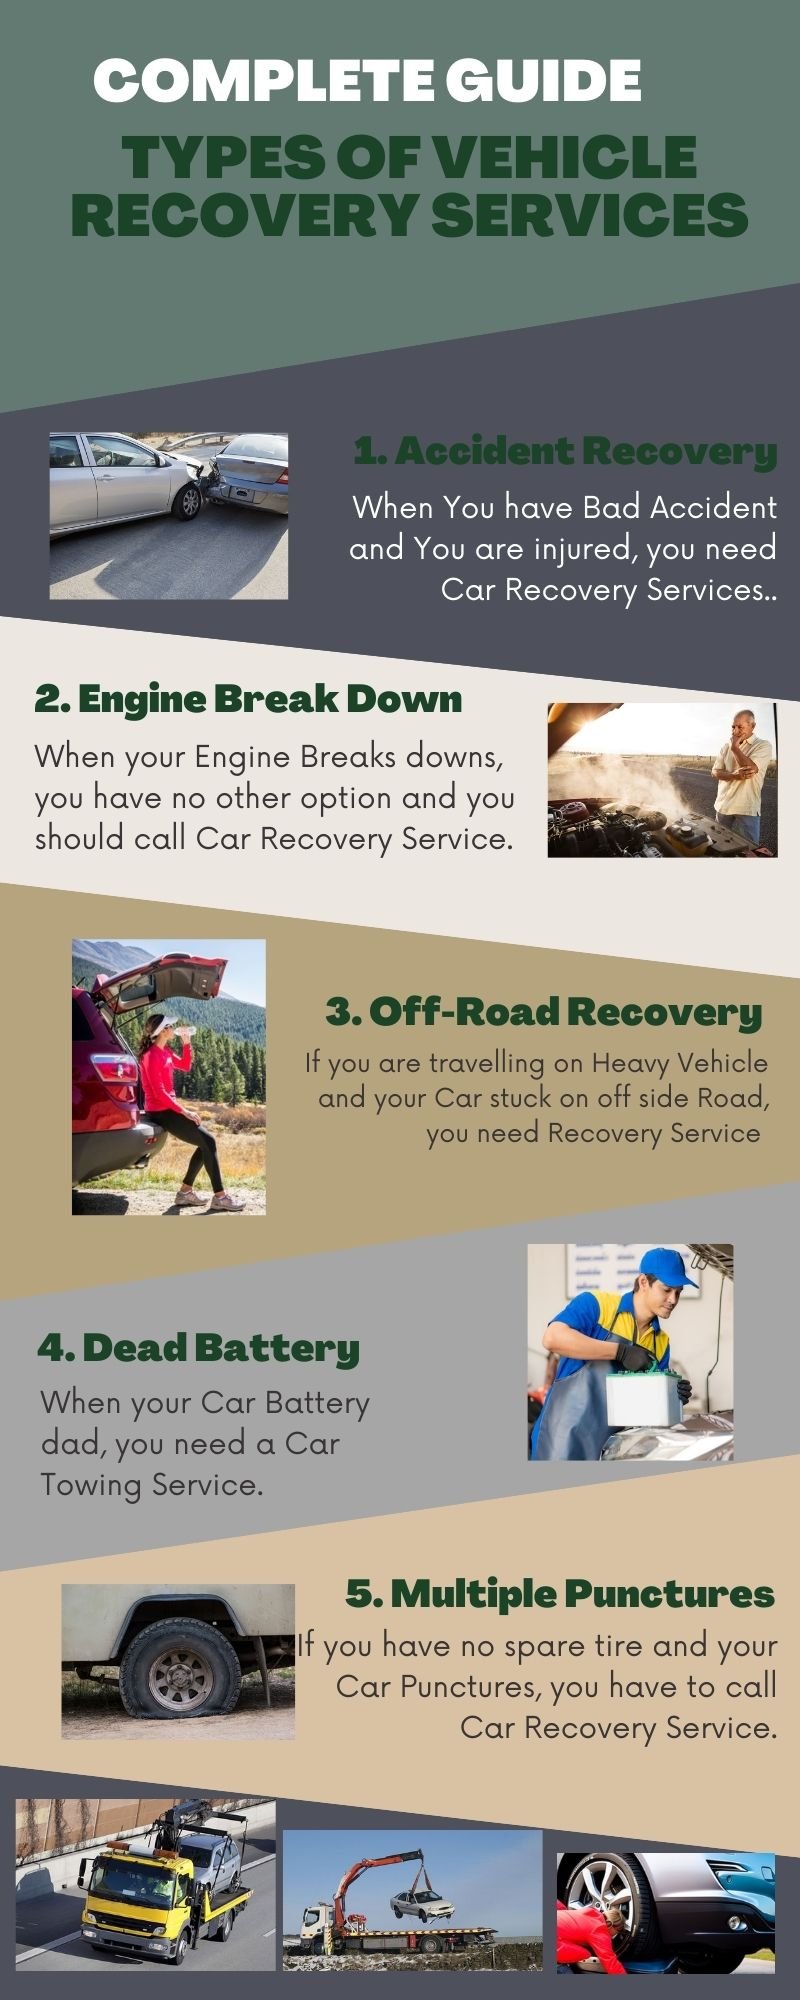 type of vehicle recovery services